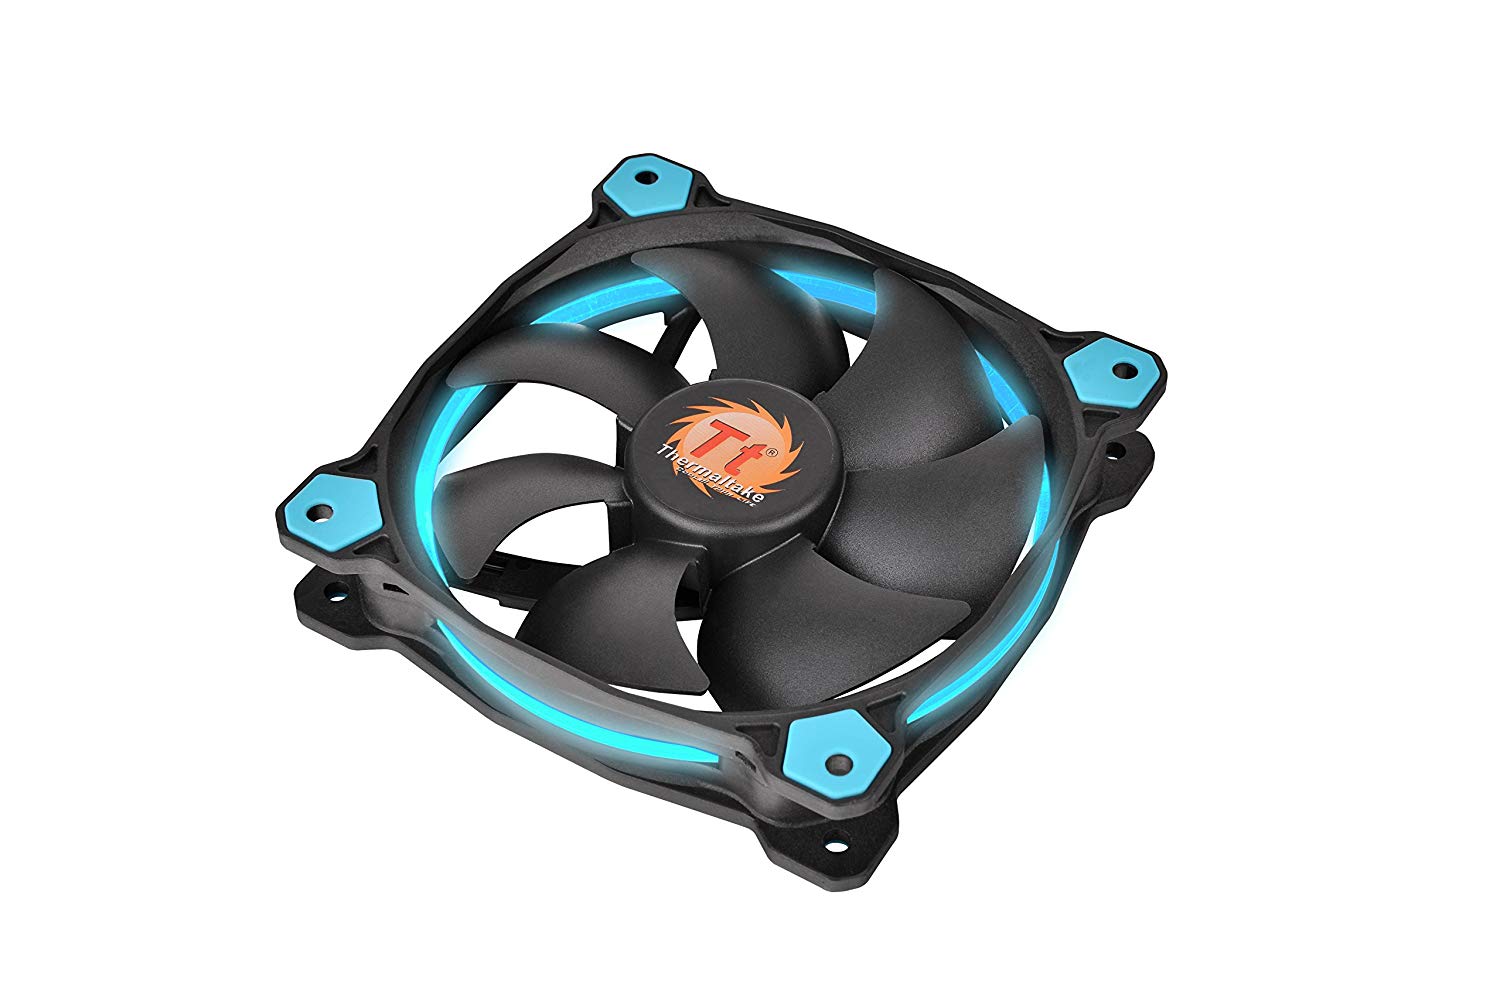 Thermaltake Ring 14 High Static Pressure 140mm Circular LED Ring CaseRadiator Fan with Anti-Vibration Mounting System Cooling CL-F039-PL14BU-A Blue best case fans